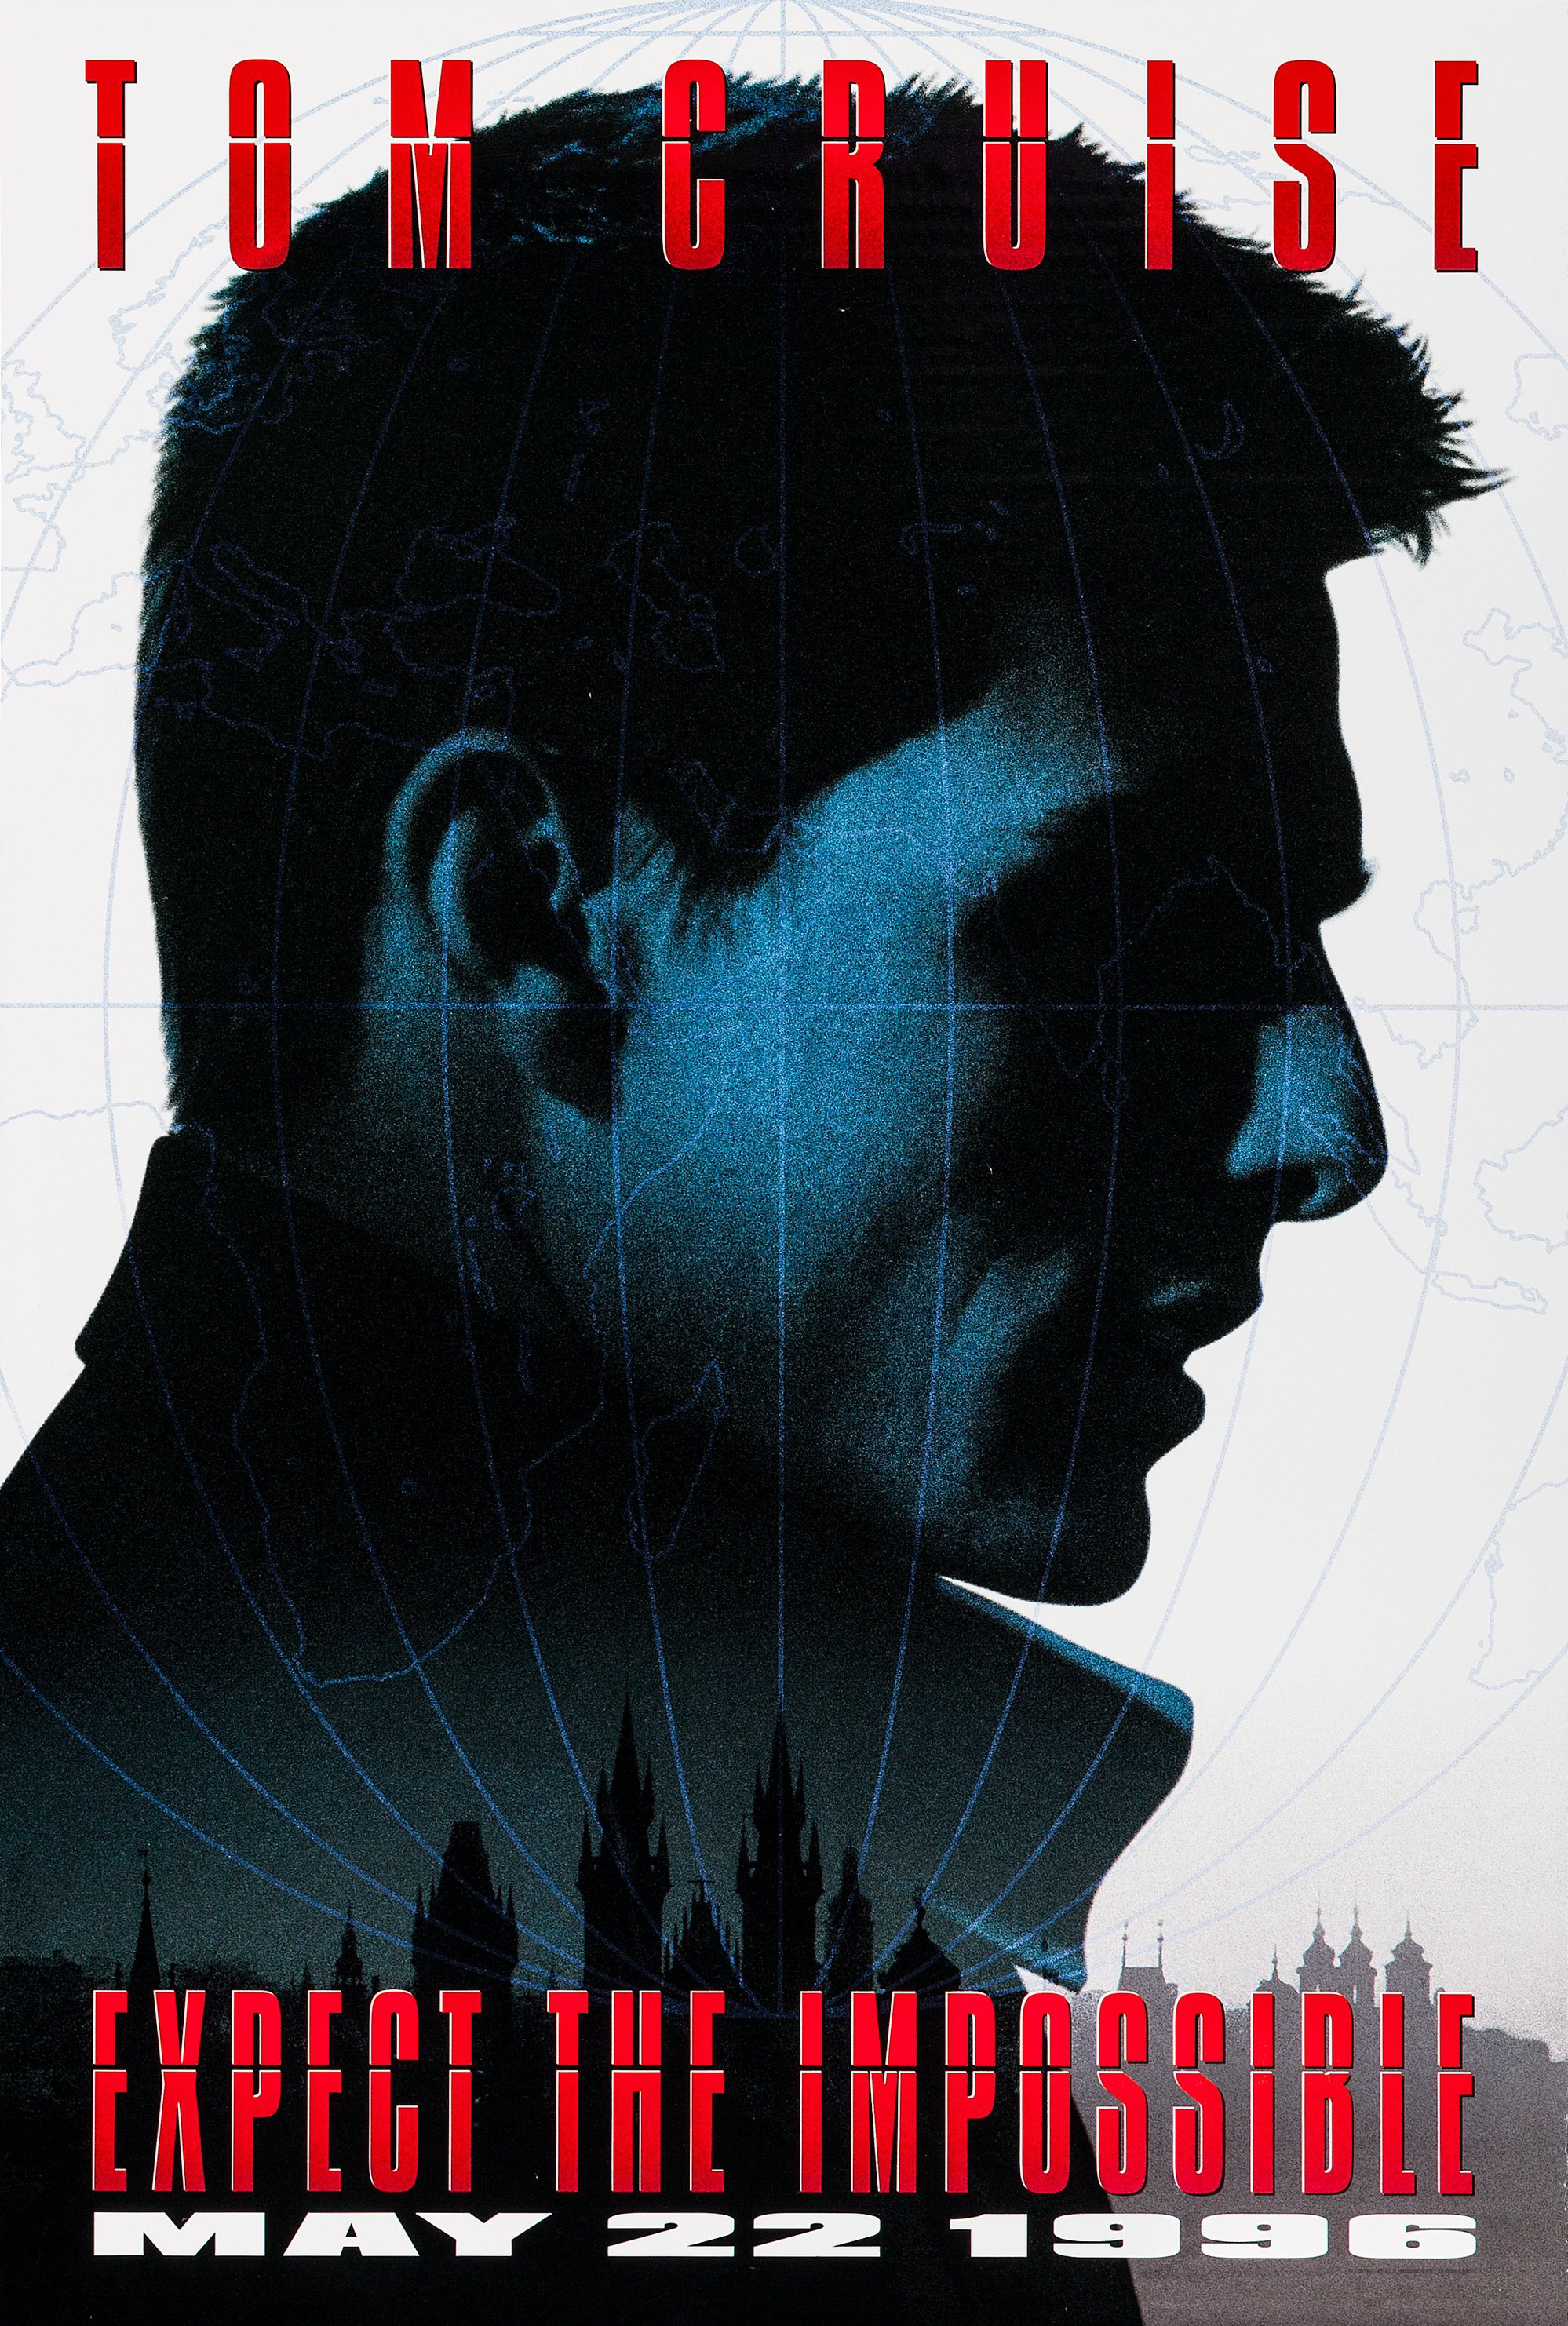 Mega Sized Movie Poster Image for Mission: Impossible (#1 of 2)